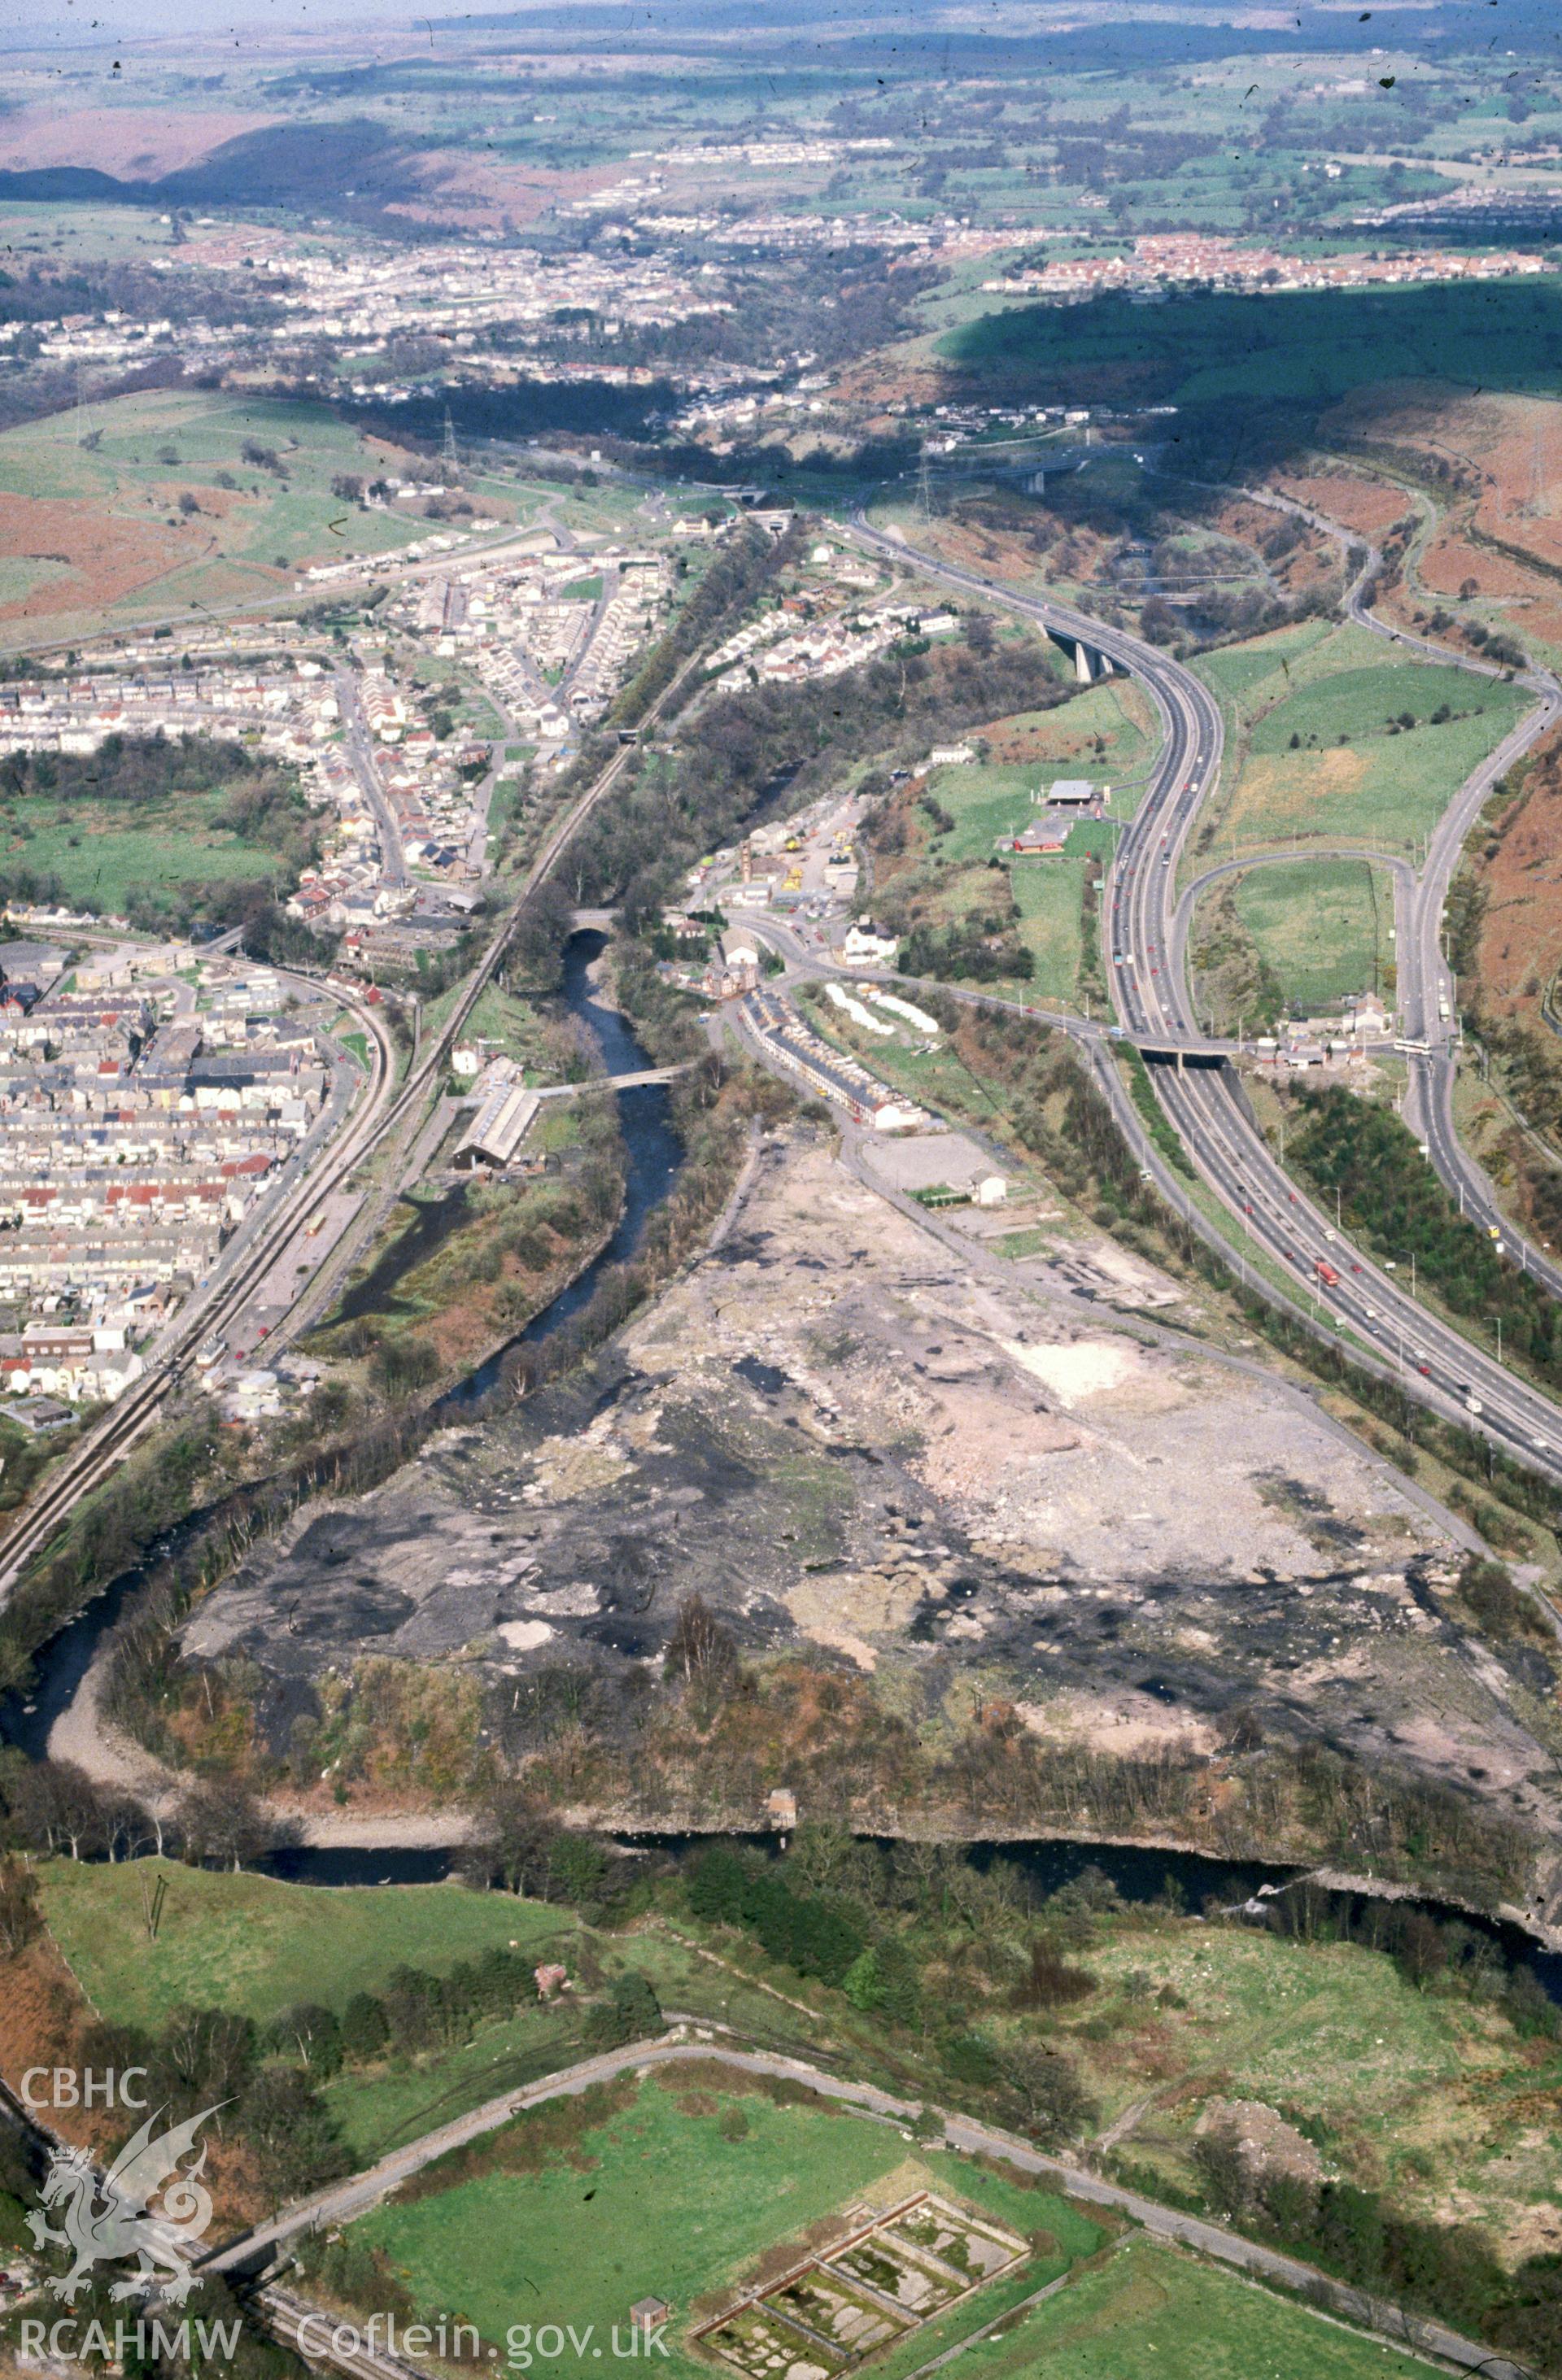 Slide of RCAHMW colour oblique aerial photograph of Abercynon Colliery, taken by C.R. Musson, 26/3/1990.